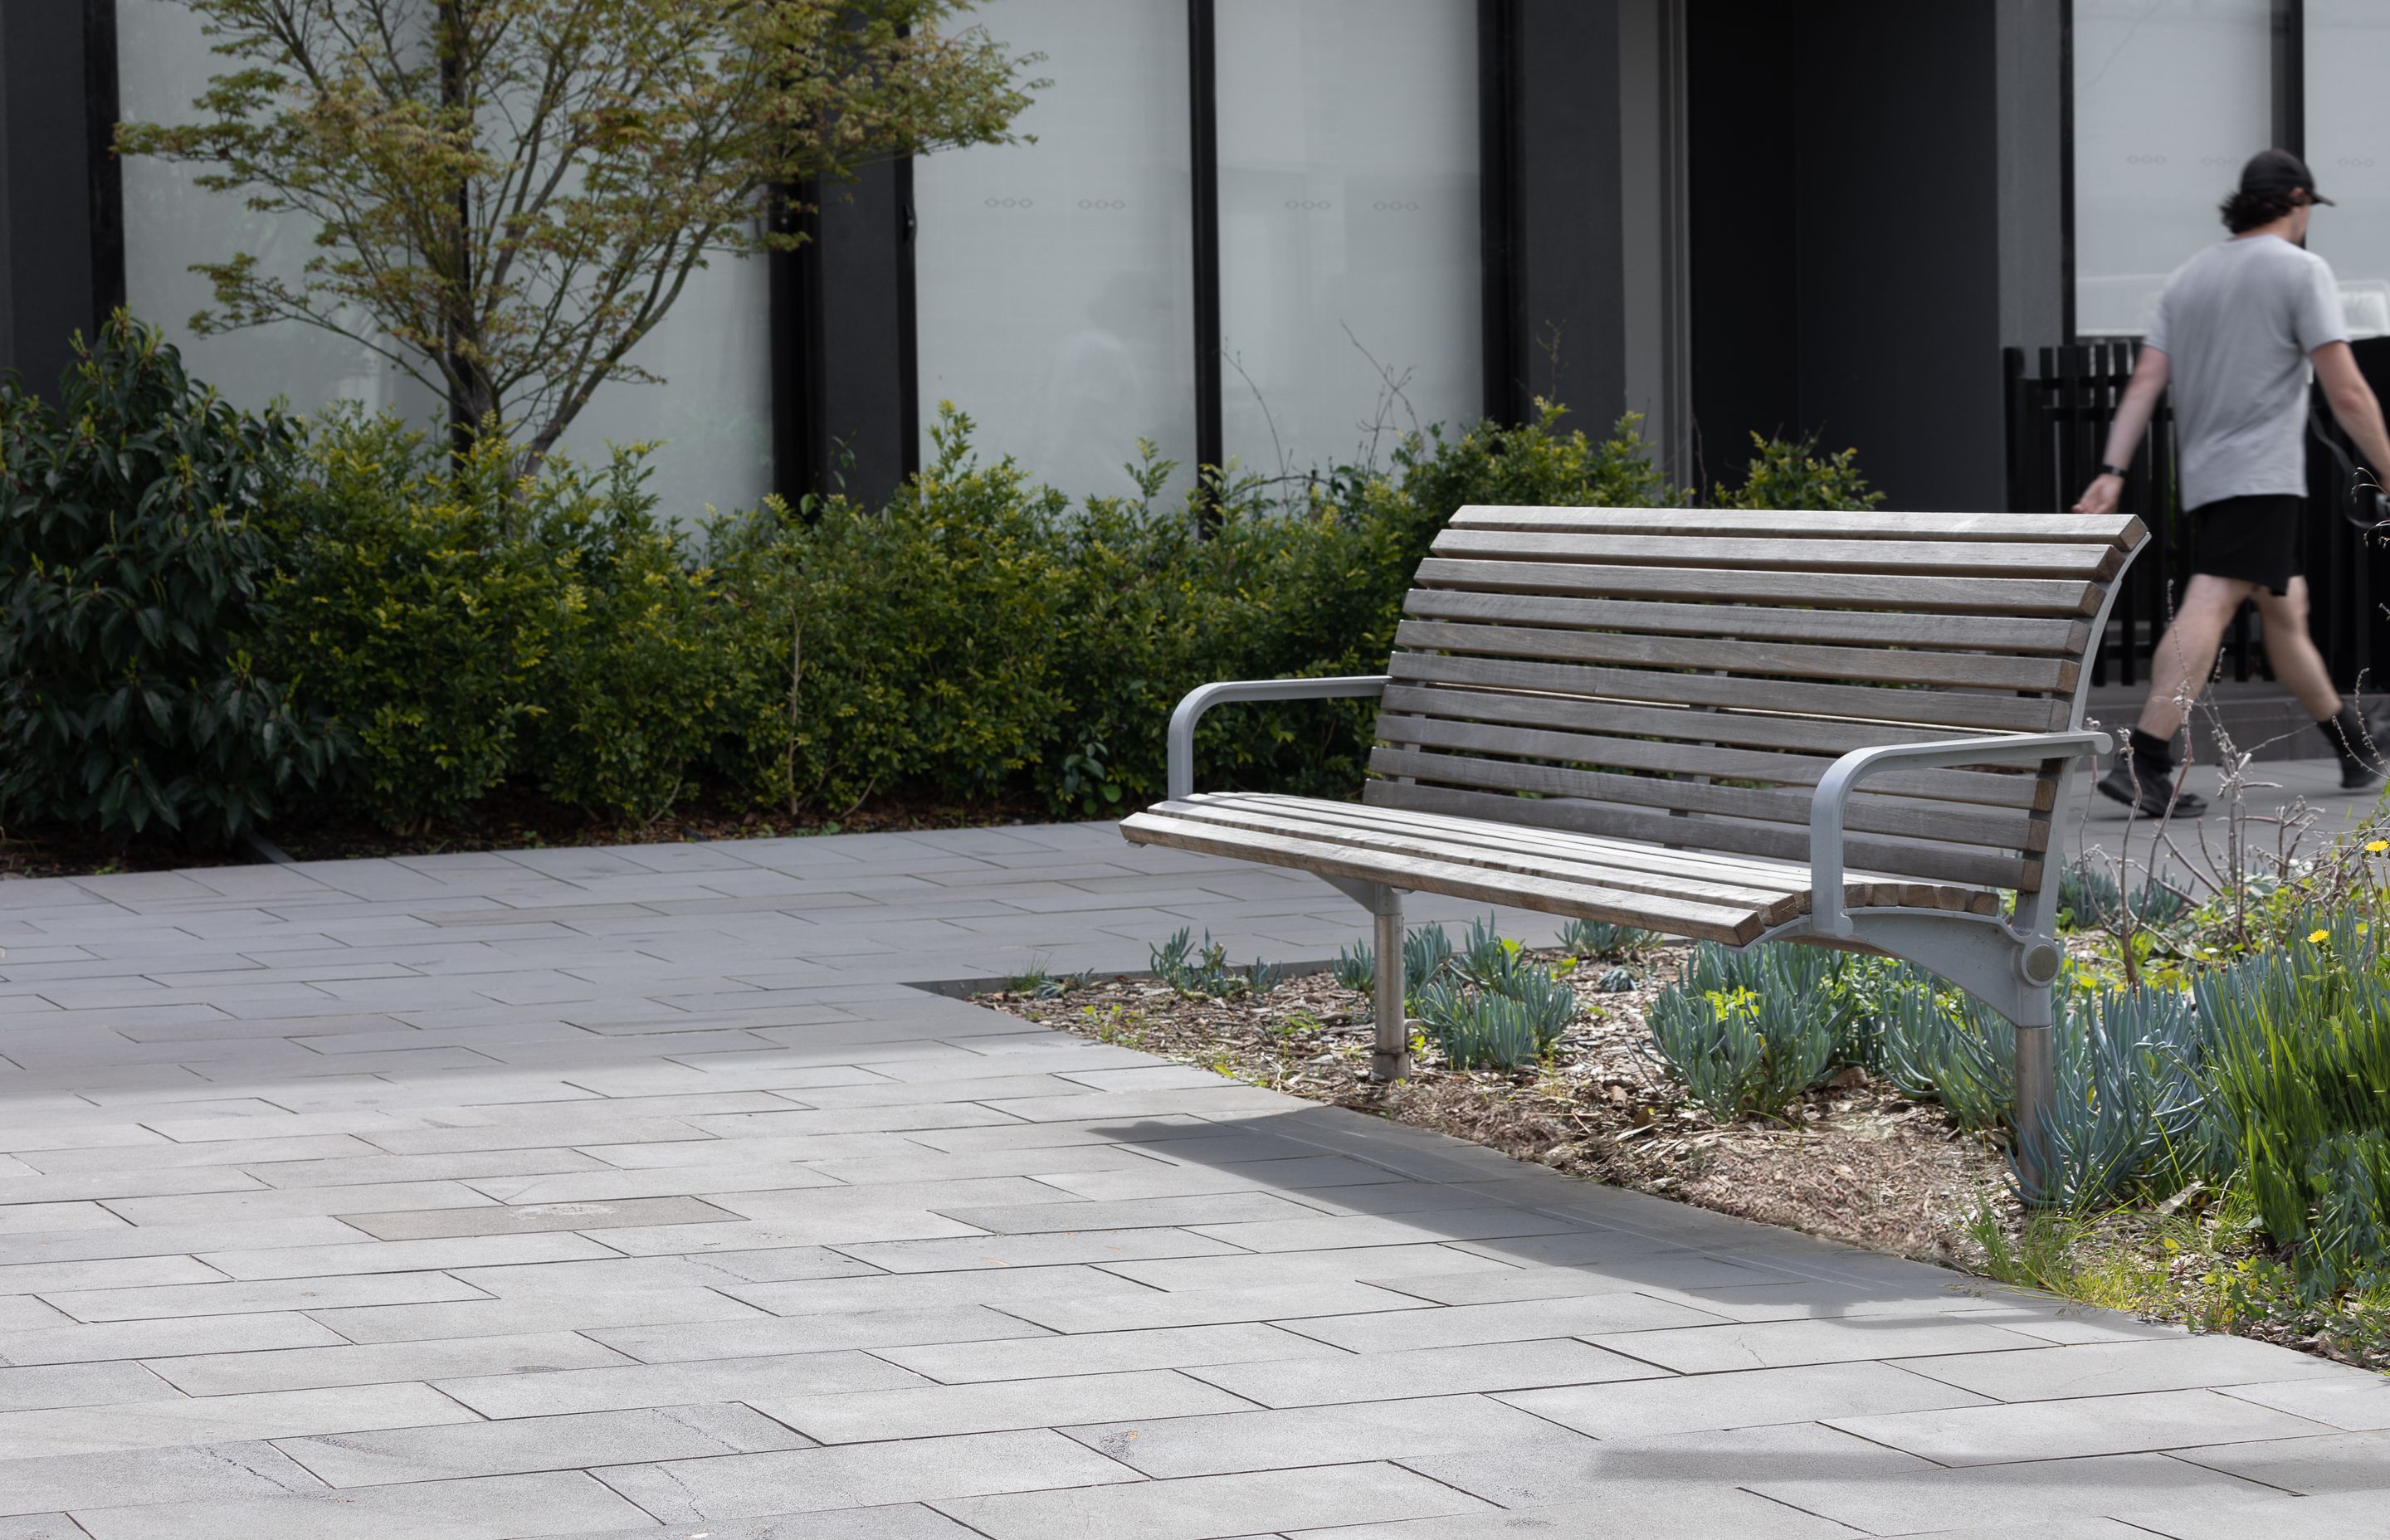 Melbourne’s YarraBend project featuring our Bluestone Paving and Flowpoint Grout paved the way to a stunning reception.